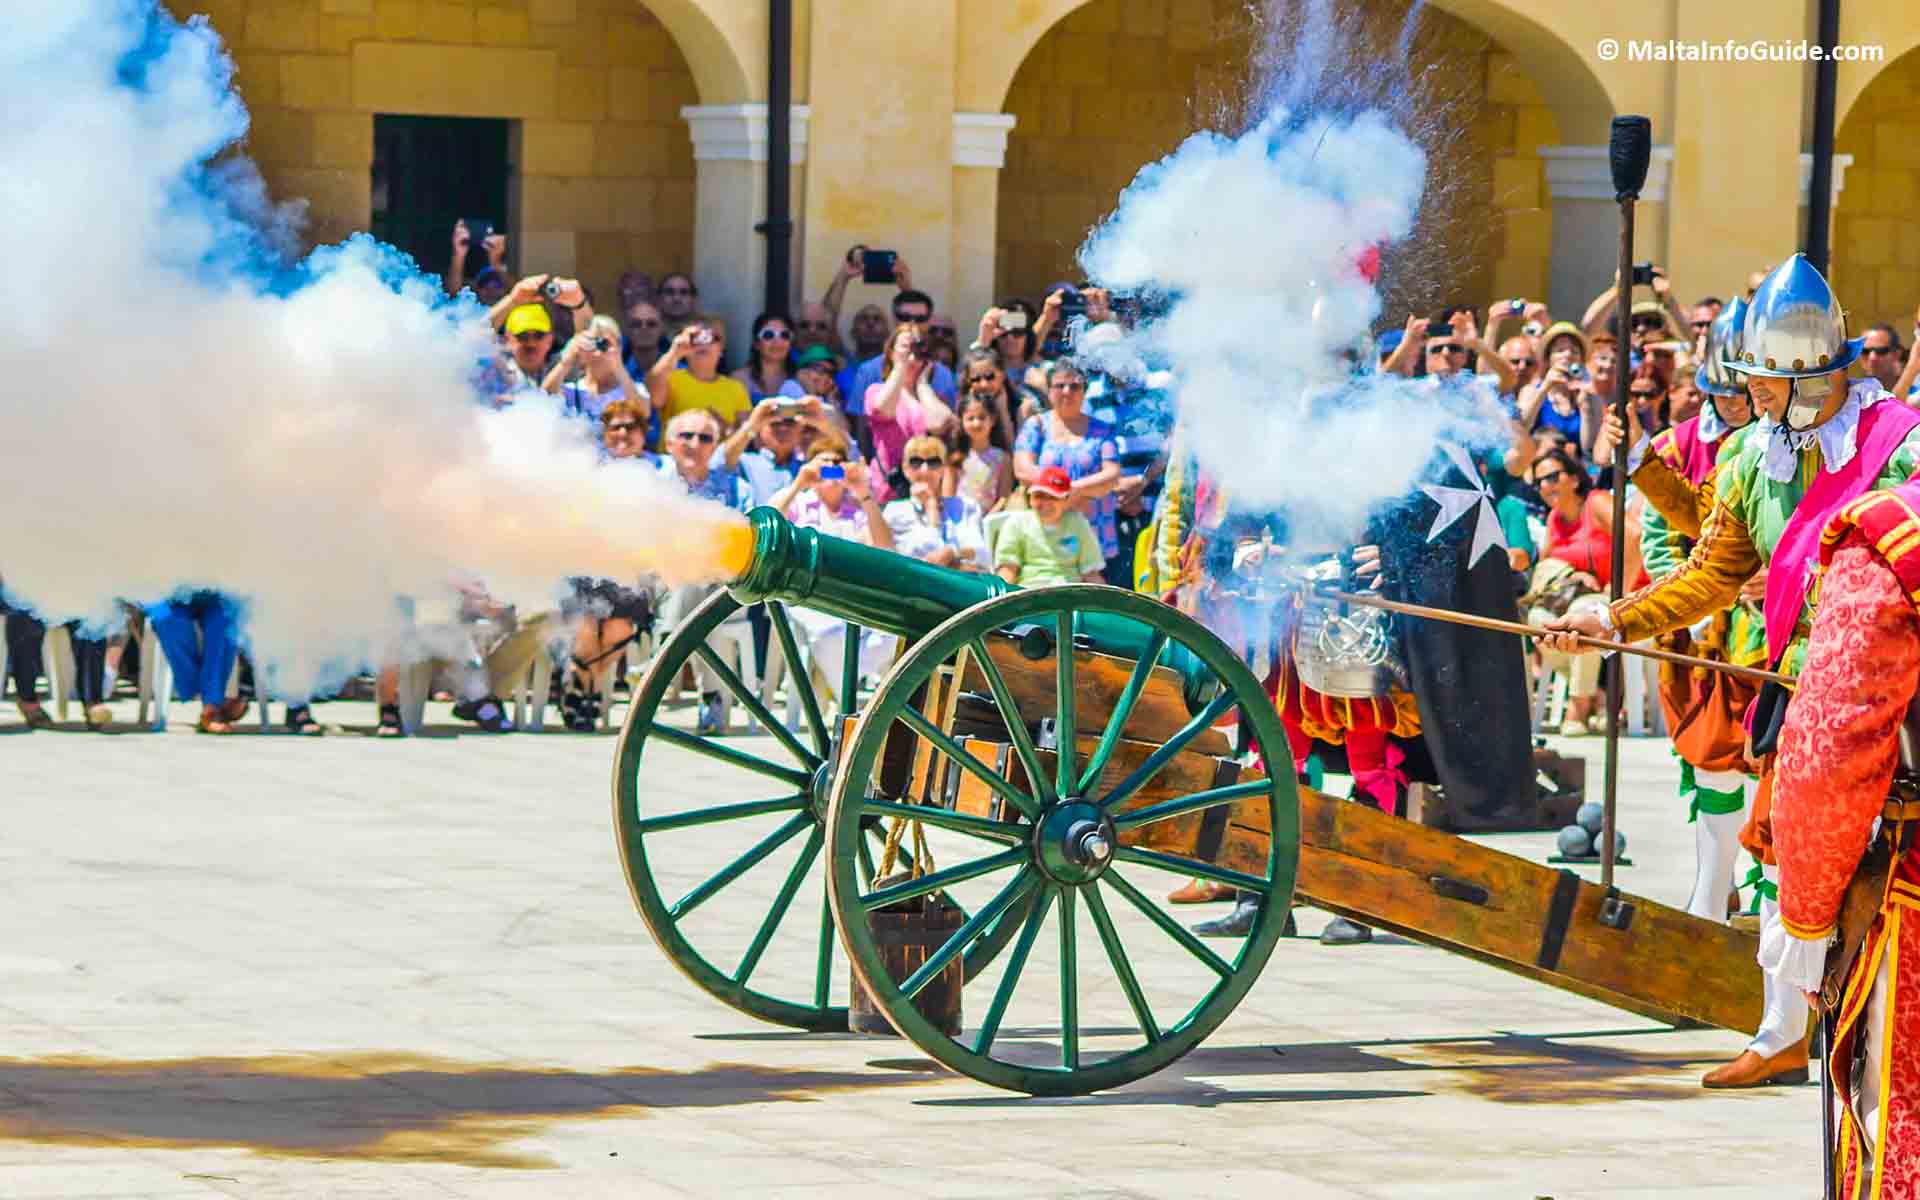 A large cannon being fired during the parade.